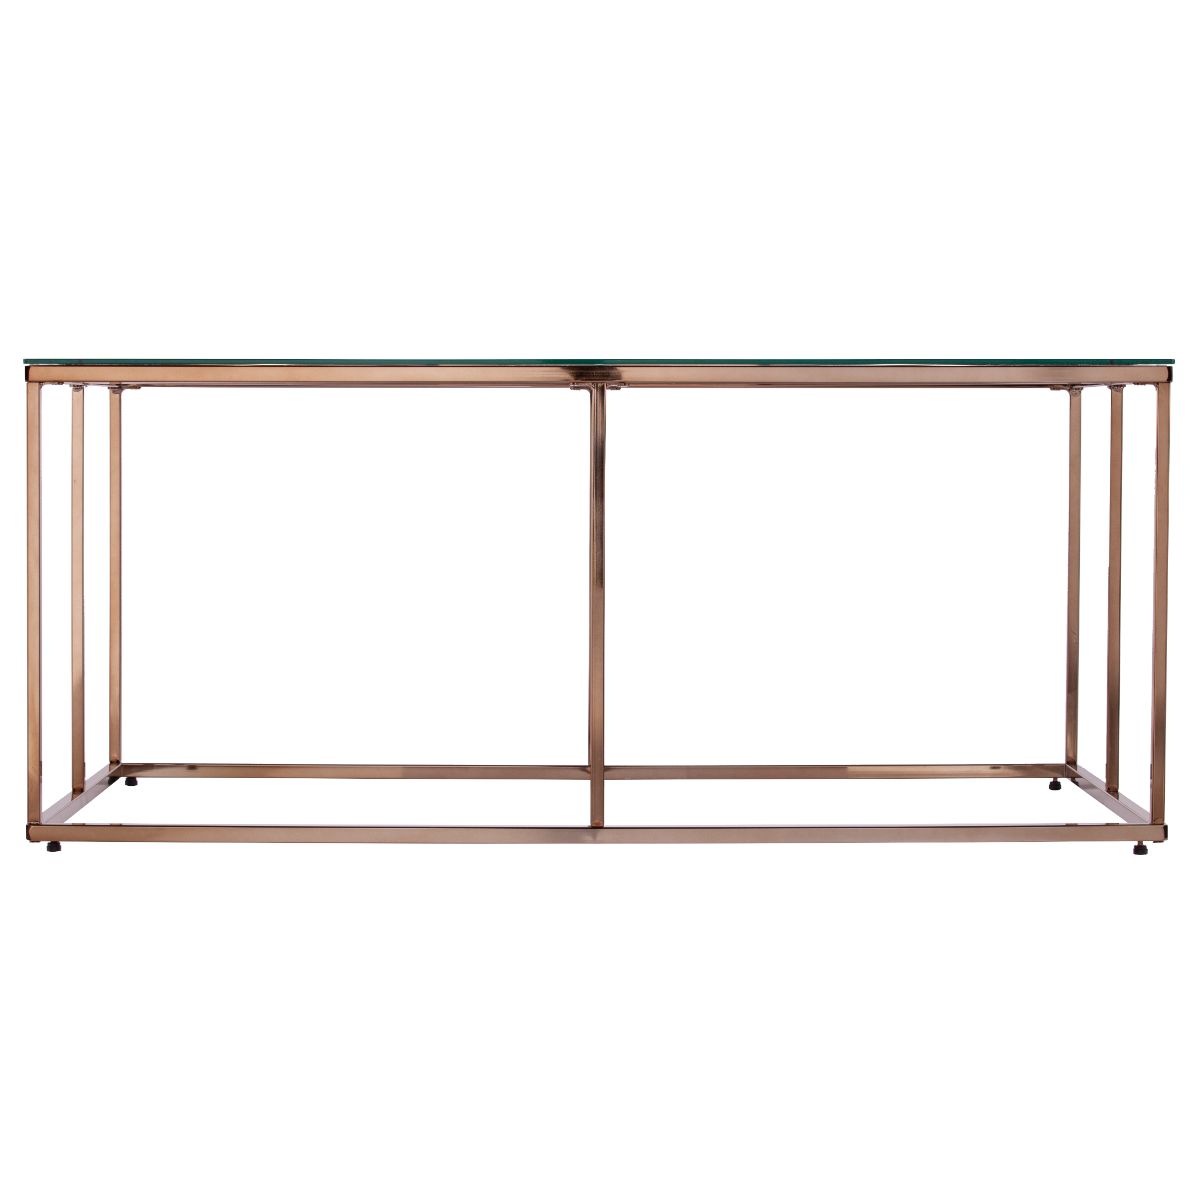 42" Gold and Black Contemporary Style Rectangular Glass Top Cocktail Table - image 1 of 4